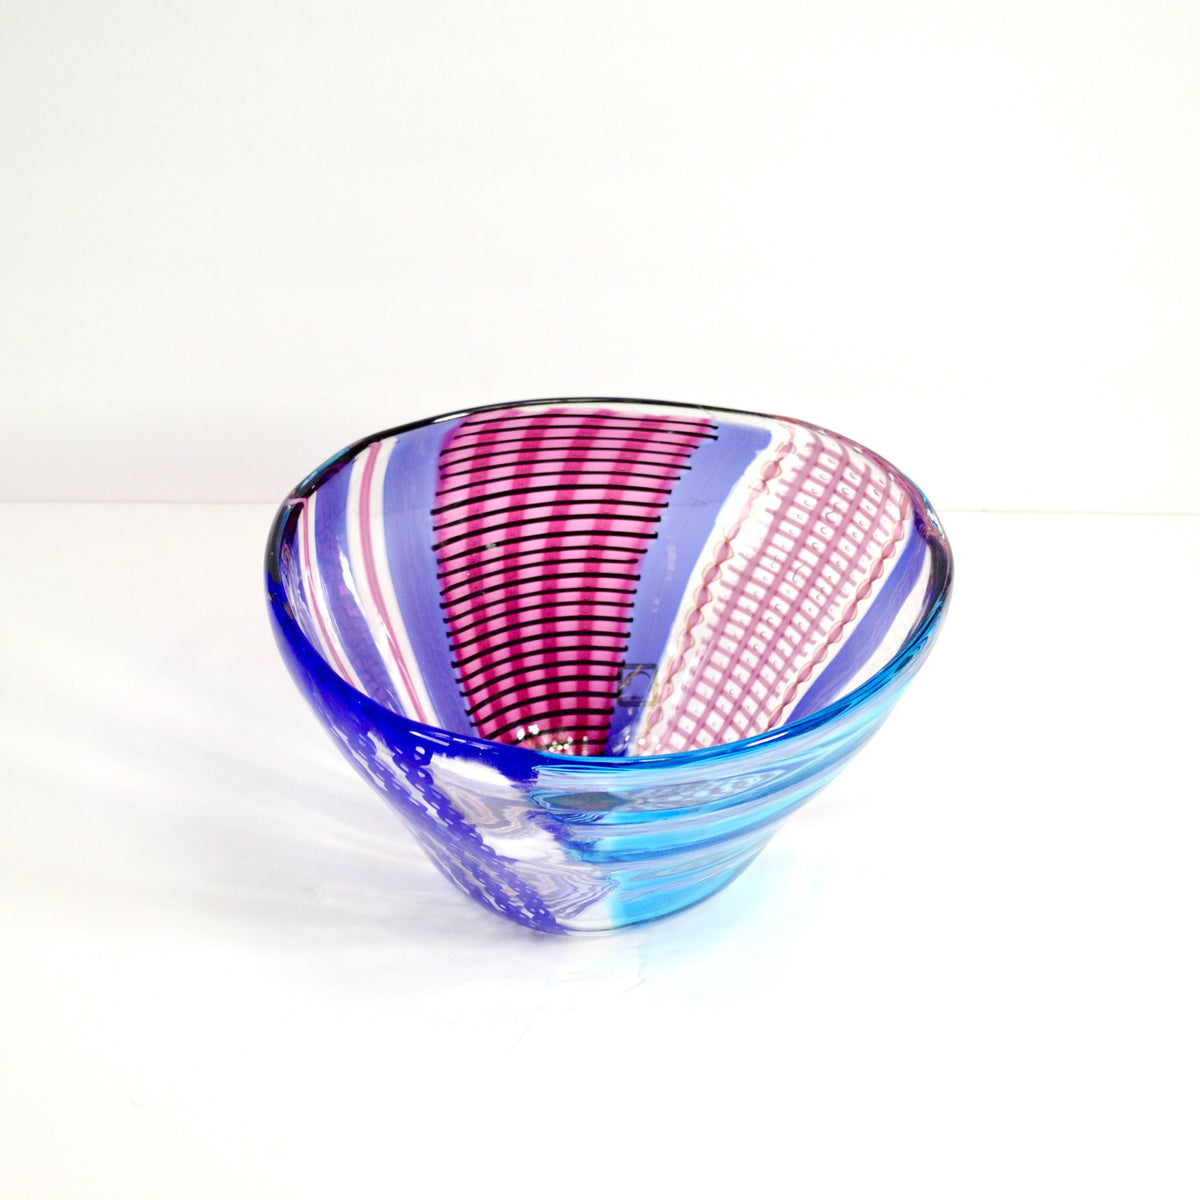 Murano Glass Large Art Centerpiece Bowl, lilac, blue, Made in Italy - My Italian Decor